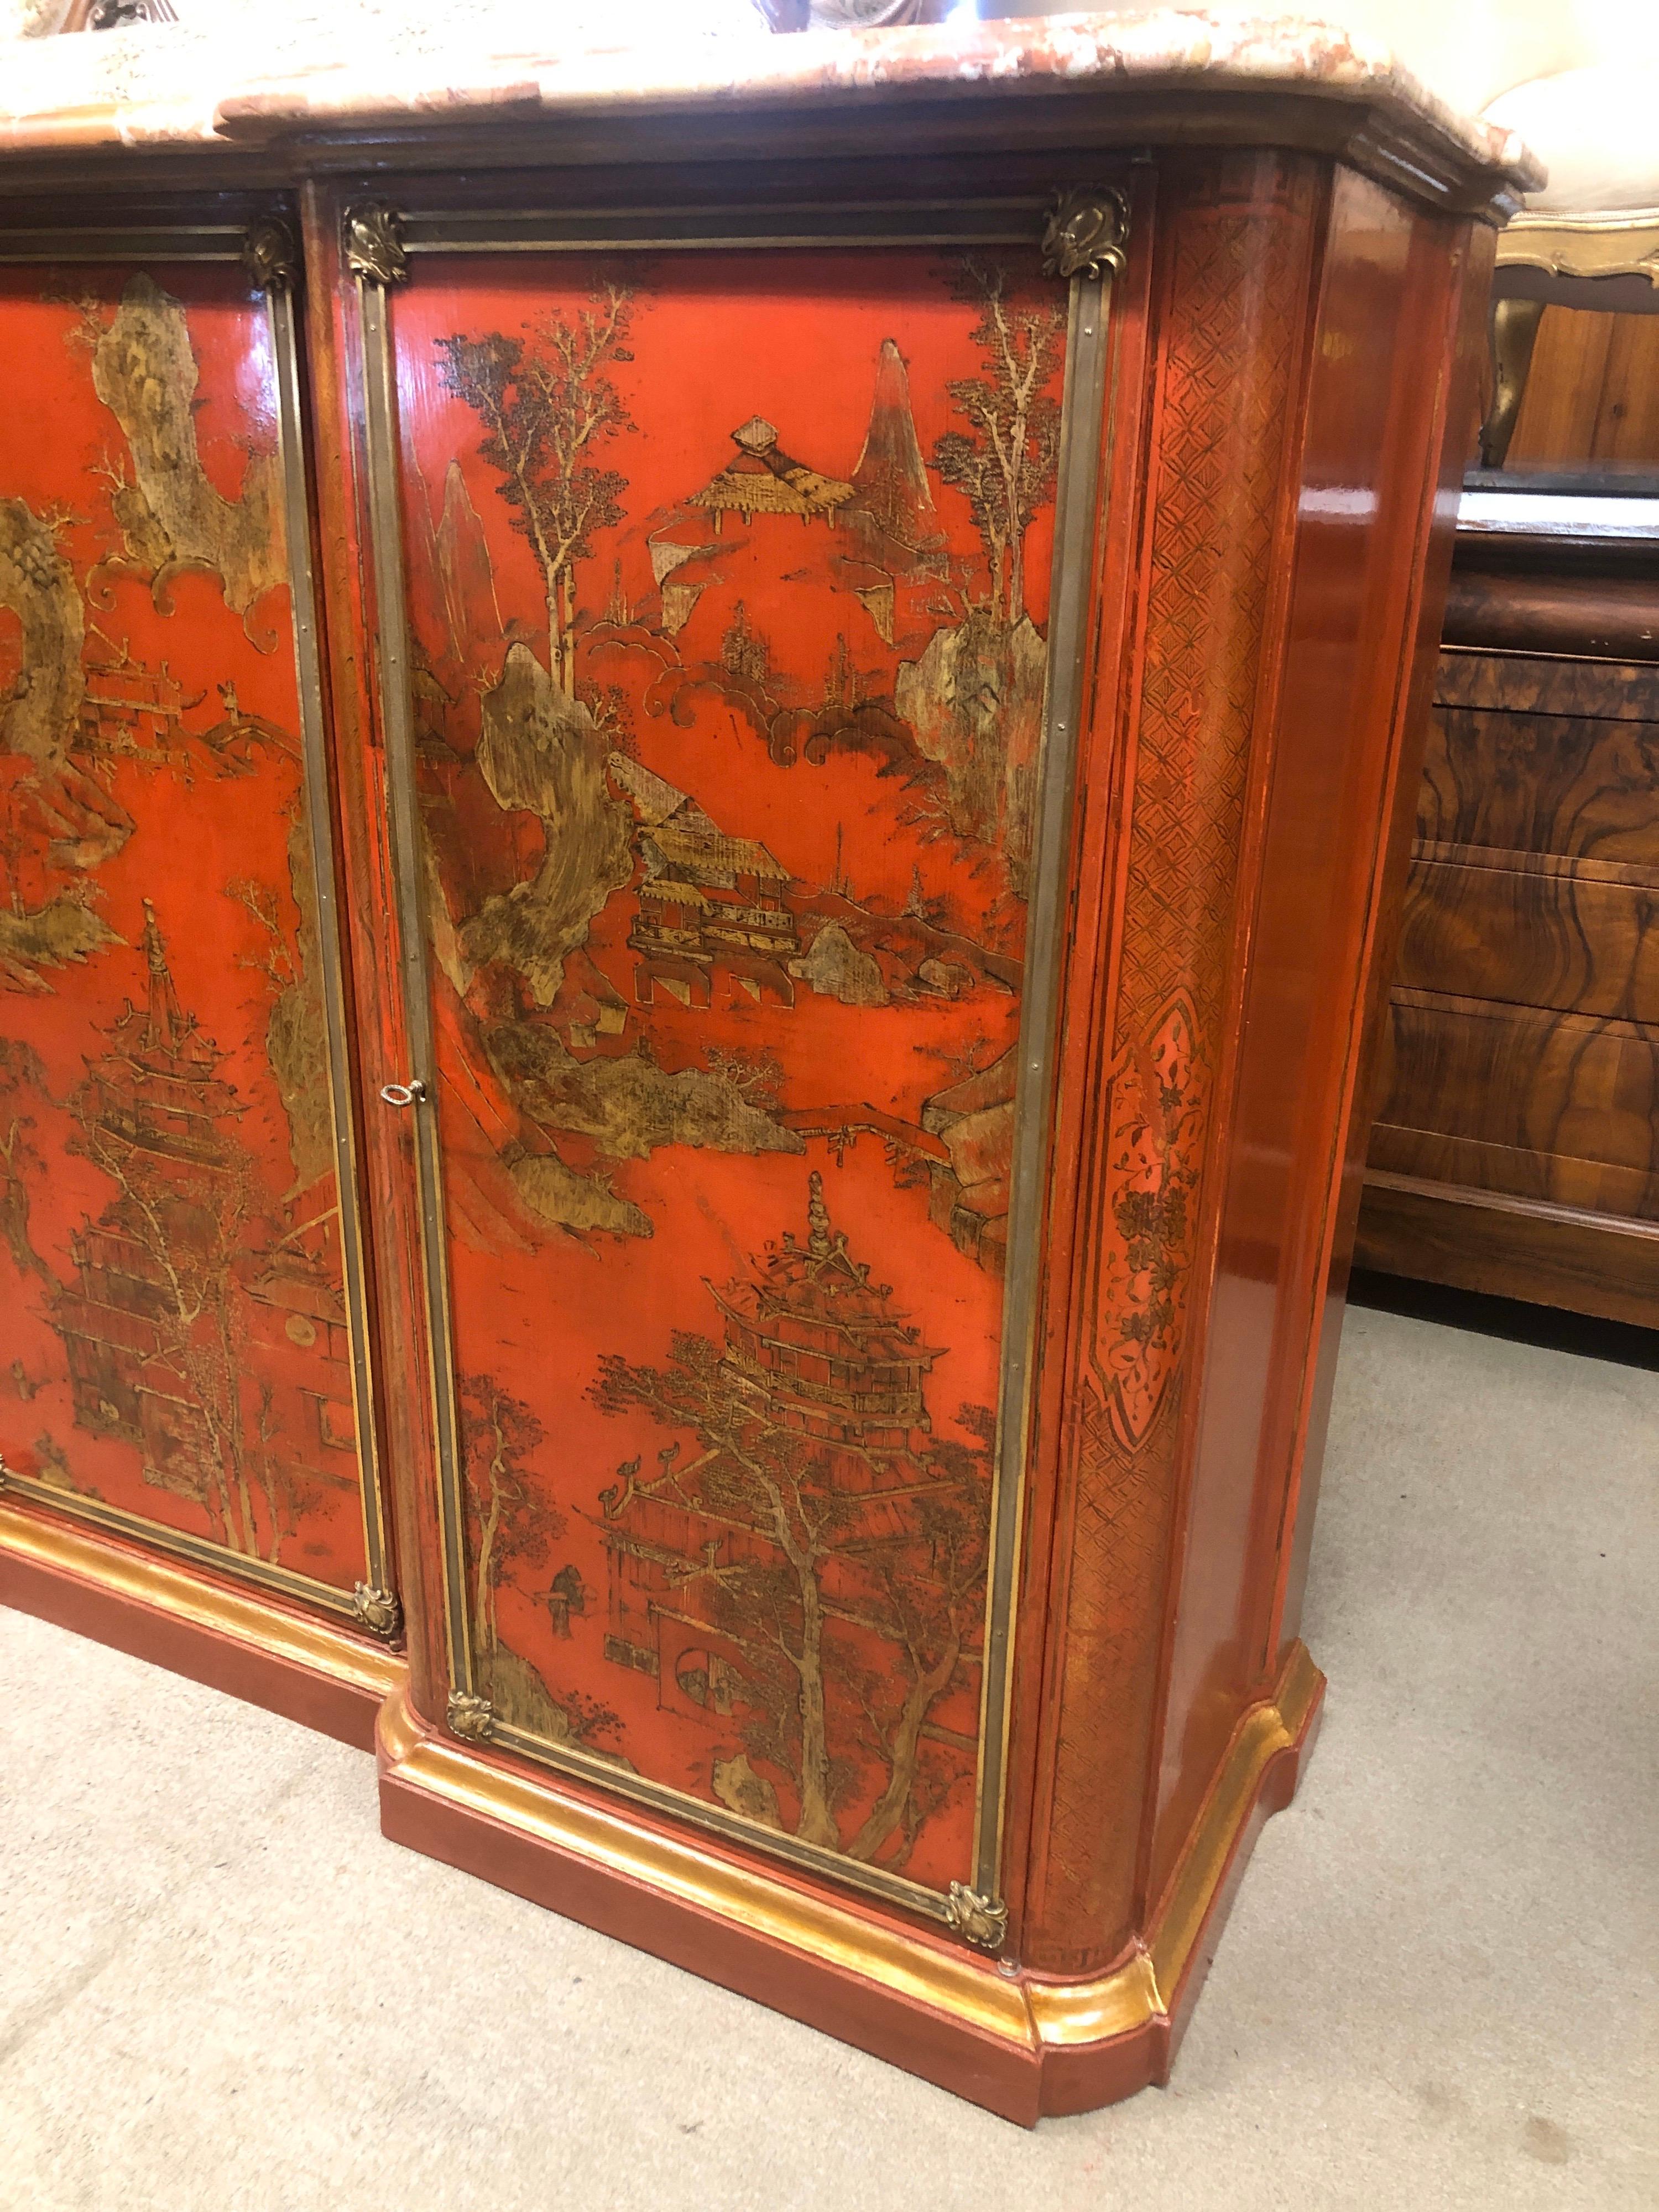 French sideboard, Napoleon III period, circa 1860, lacquered in red with gold Chinoiserie designs, original bronzes framing the three doors, the sideboard is moved on the sides, the marble has a restoration. Inside (completely in solid oak like the